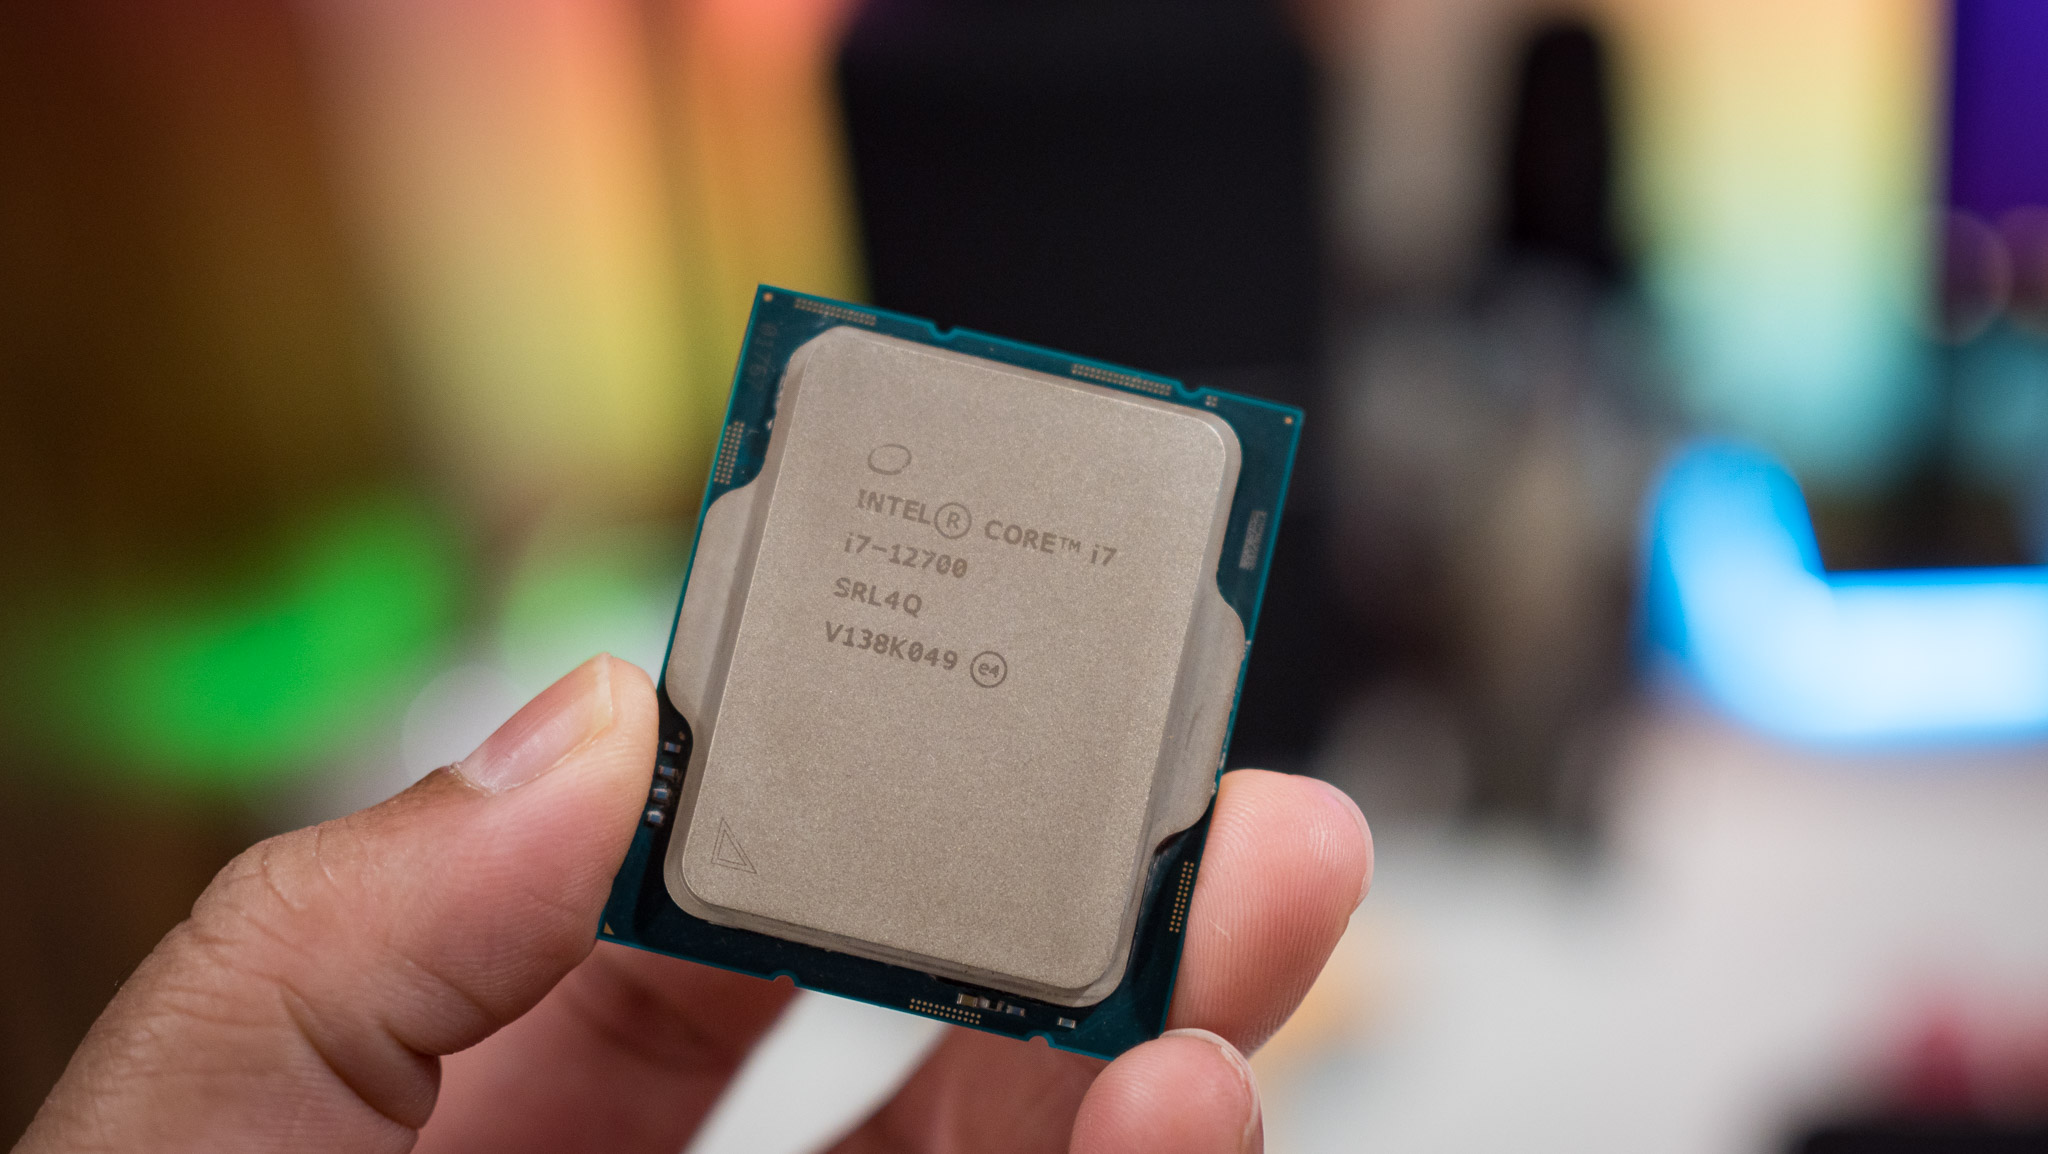 CPU deals: Intel Core i7-12700K is selling at 32% off today - Neowin